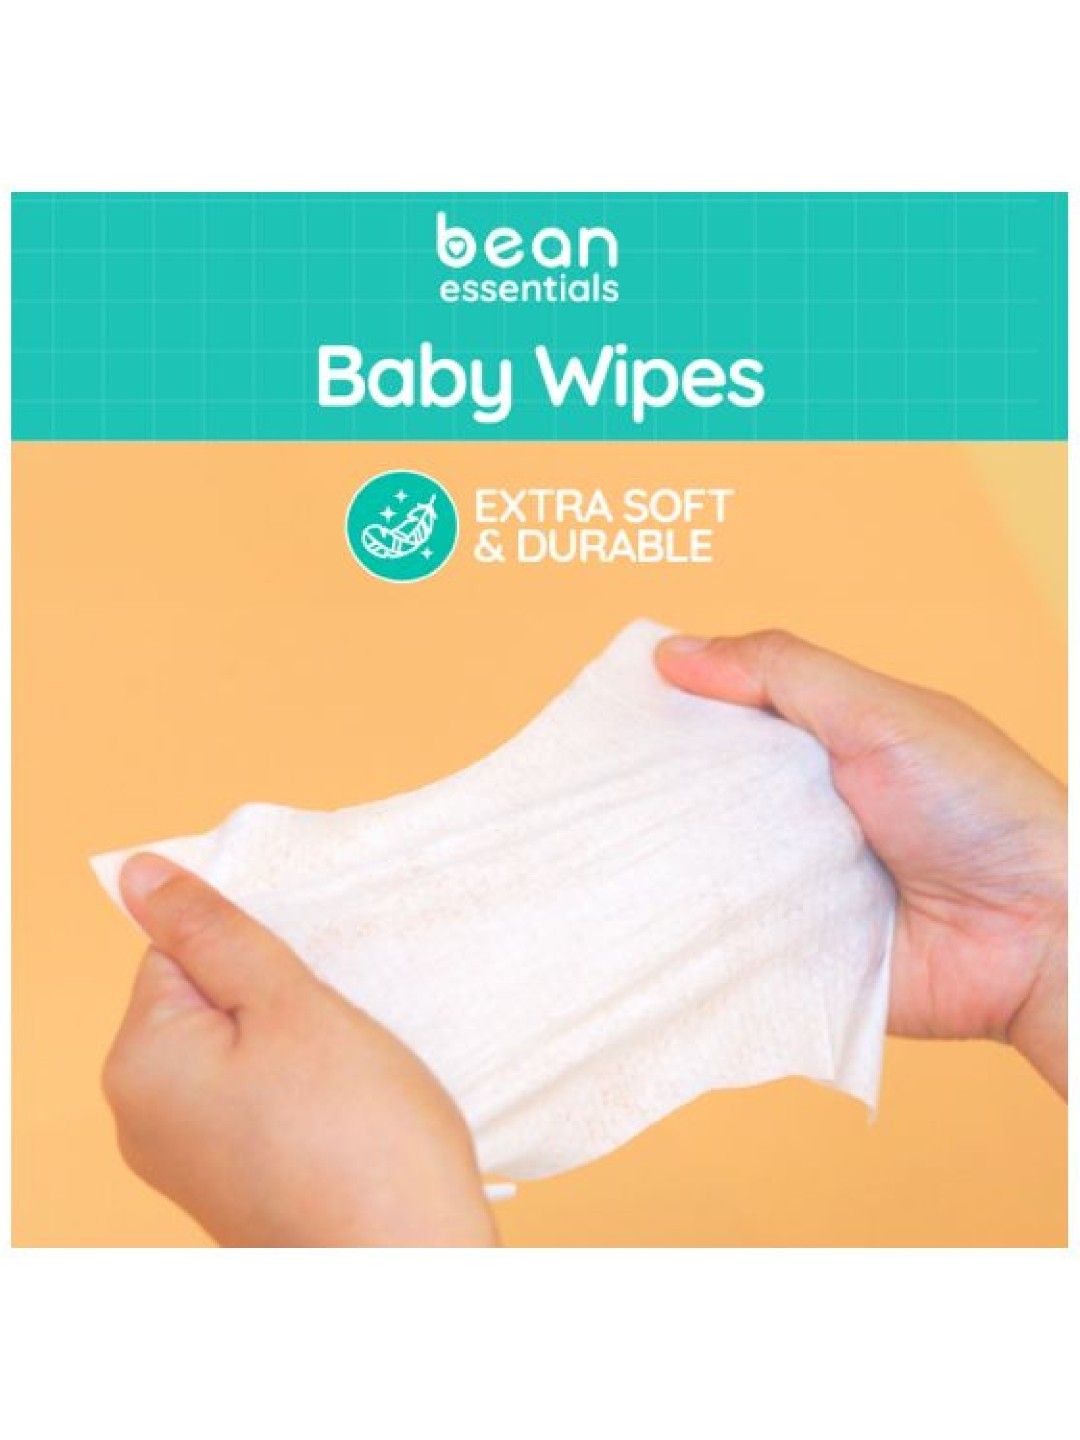 bean essentials Baby Wipes Powder Scent 100 sheets (No Color- Image 3)